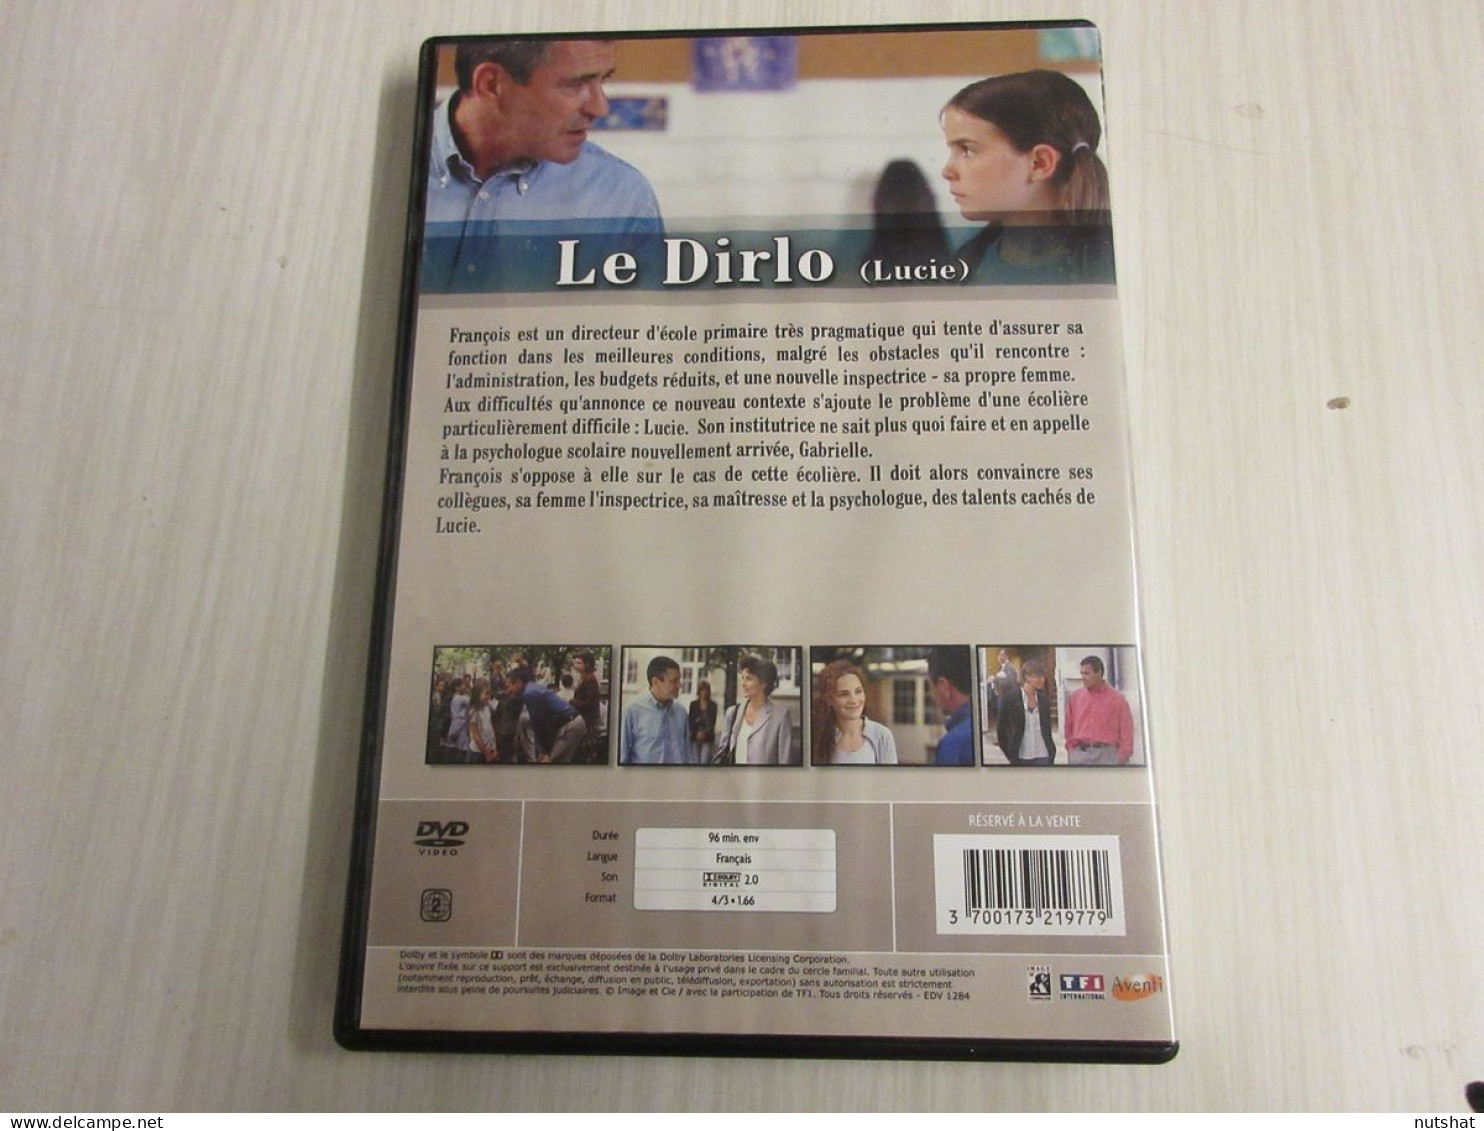 DVD SERIE TV Le DIRLO : LUCIE Jean-Marie BIGARD 2003 96mn - TV Shows & Series